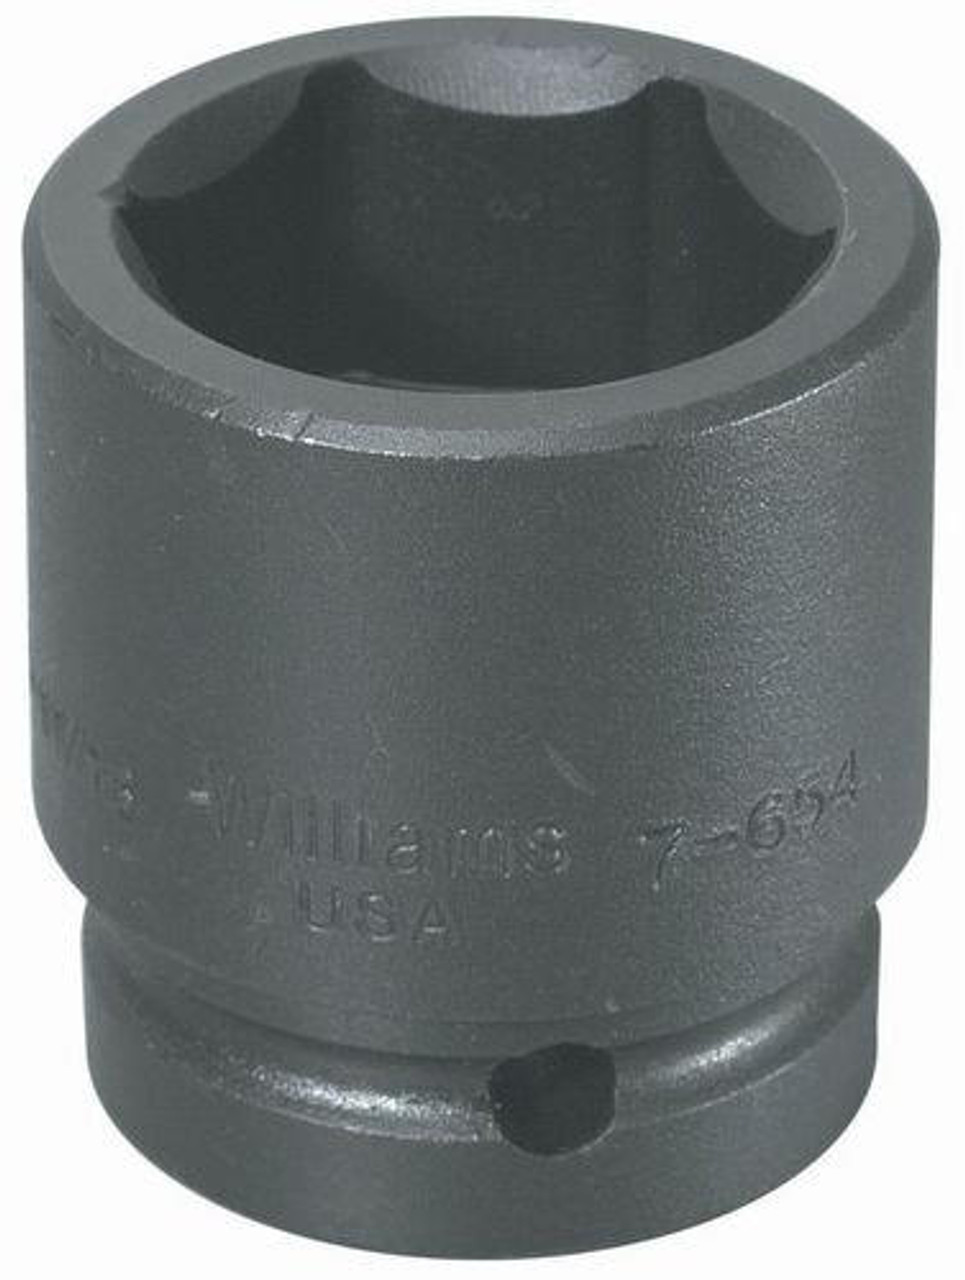 Williams Made In USA 4 7/8" Williams 1" Dr Shallow Impact Socket 6 Pt - 7-6156 